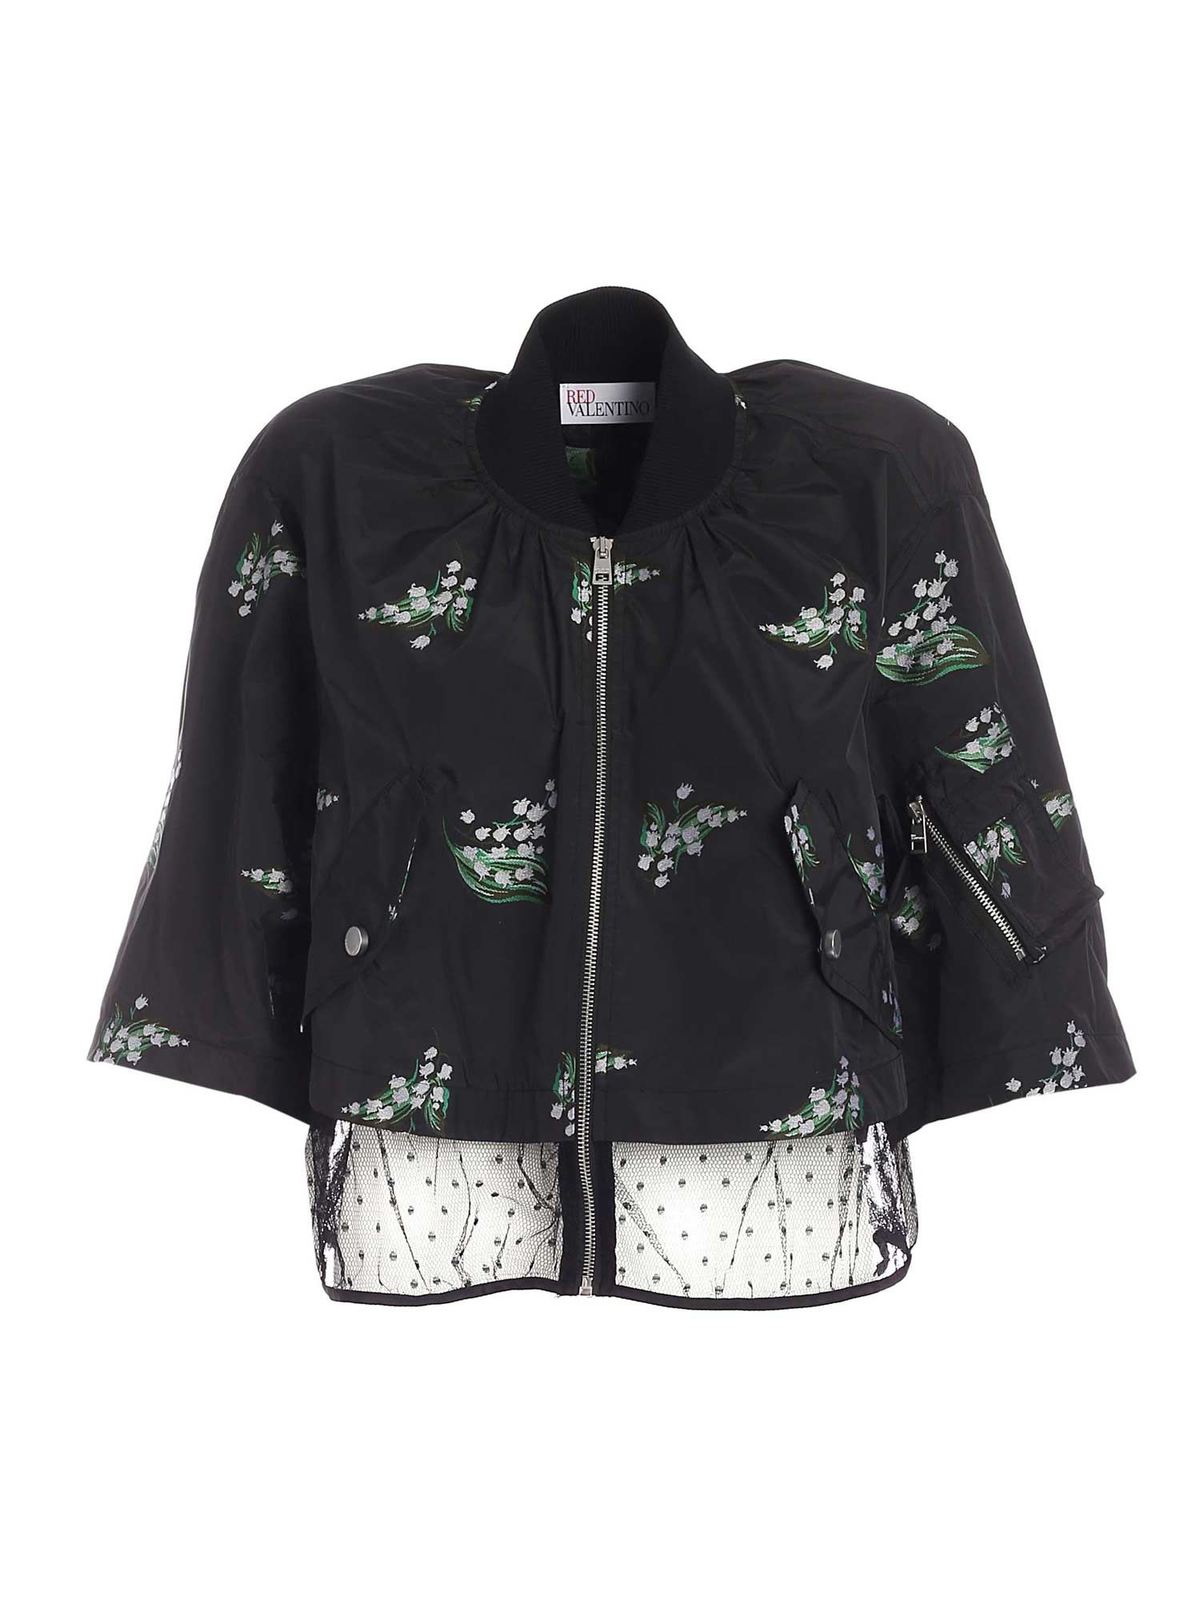 RED VALENTINO EMBROIDERED BOXY JACKET IN BLACK